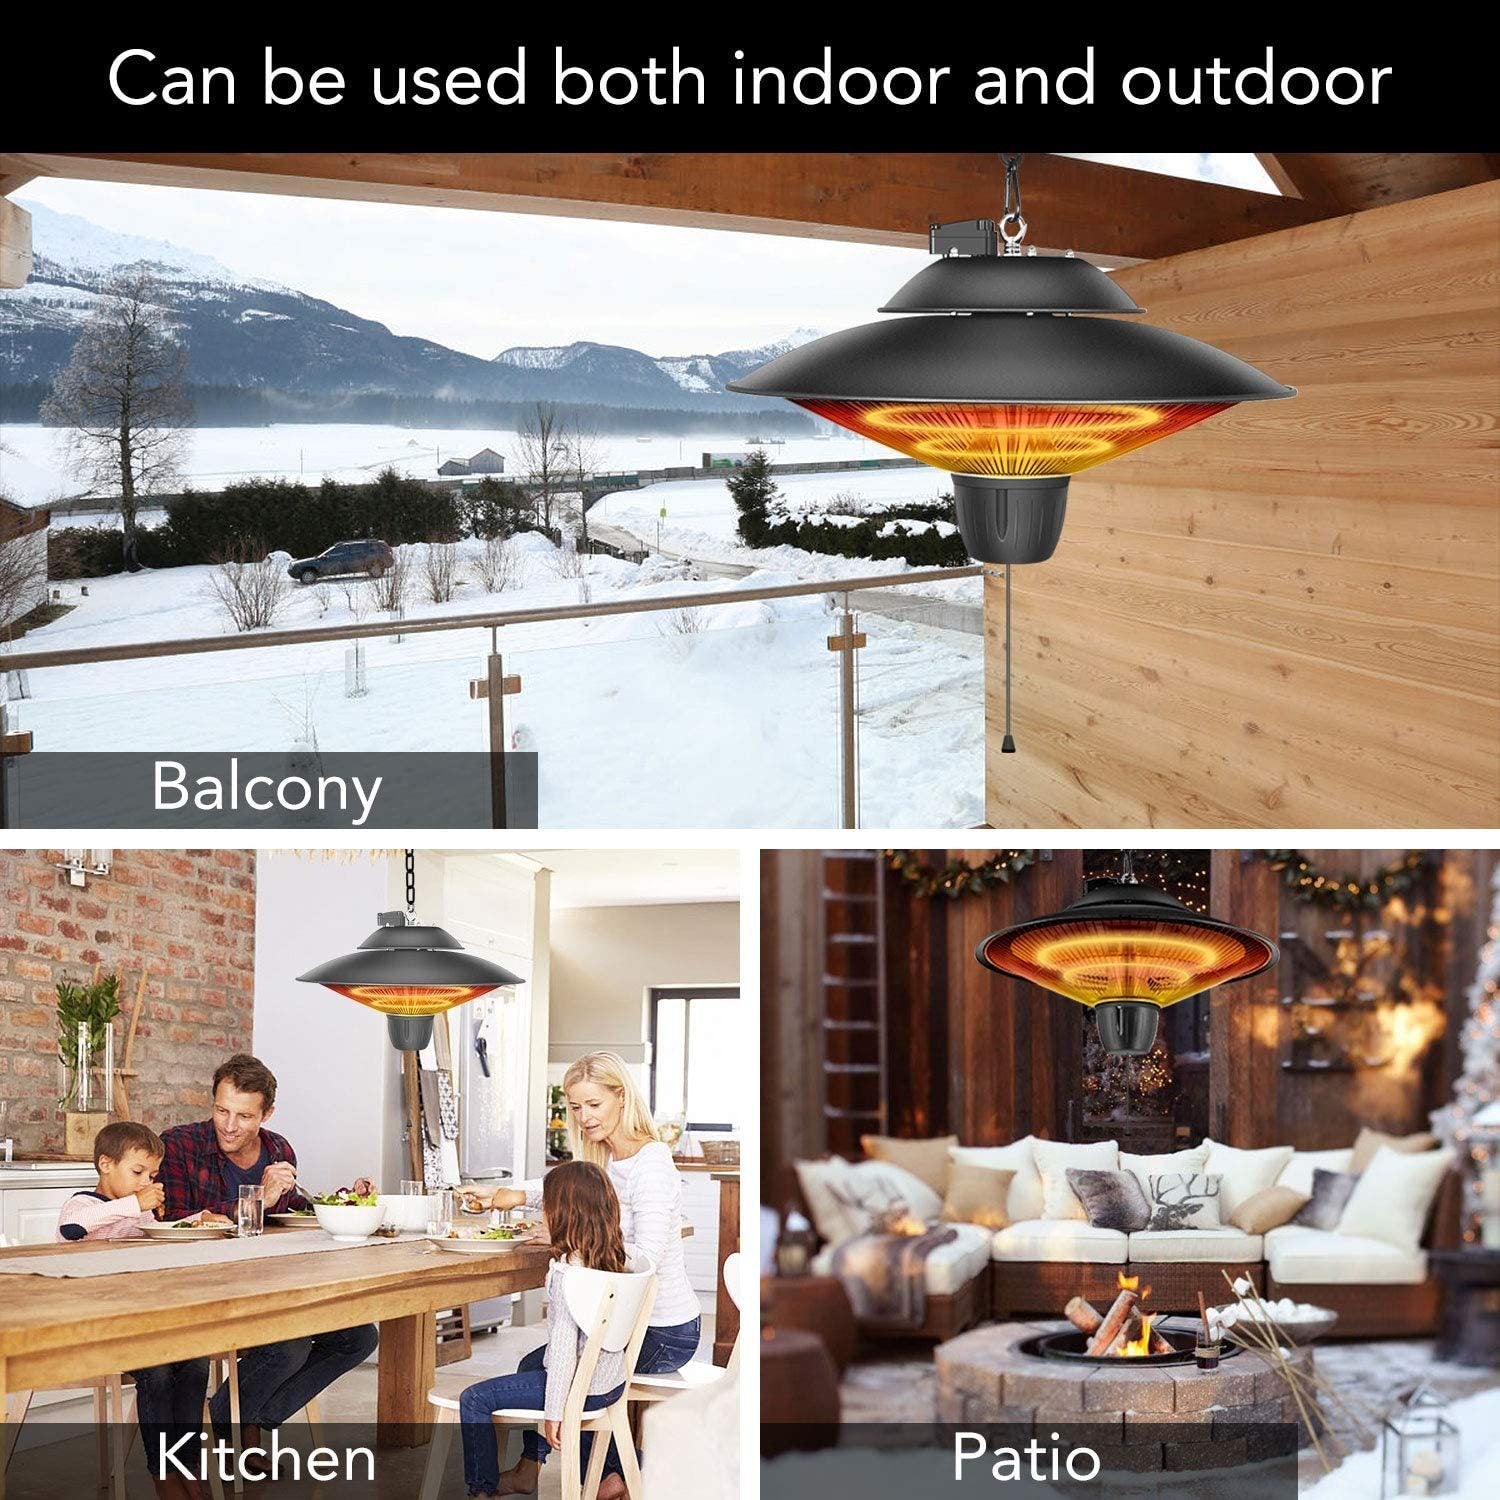 Simple Deluxe Patio Portable Outdoor Heating for Balcony, Courtyard, With Overheat Protection, Ceiling-Mounted Heater - Tonkn